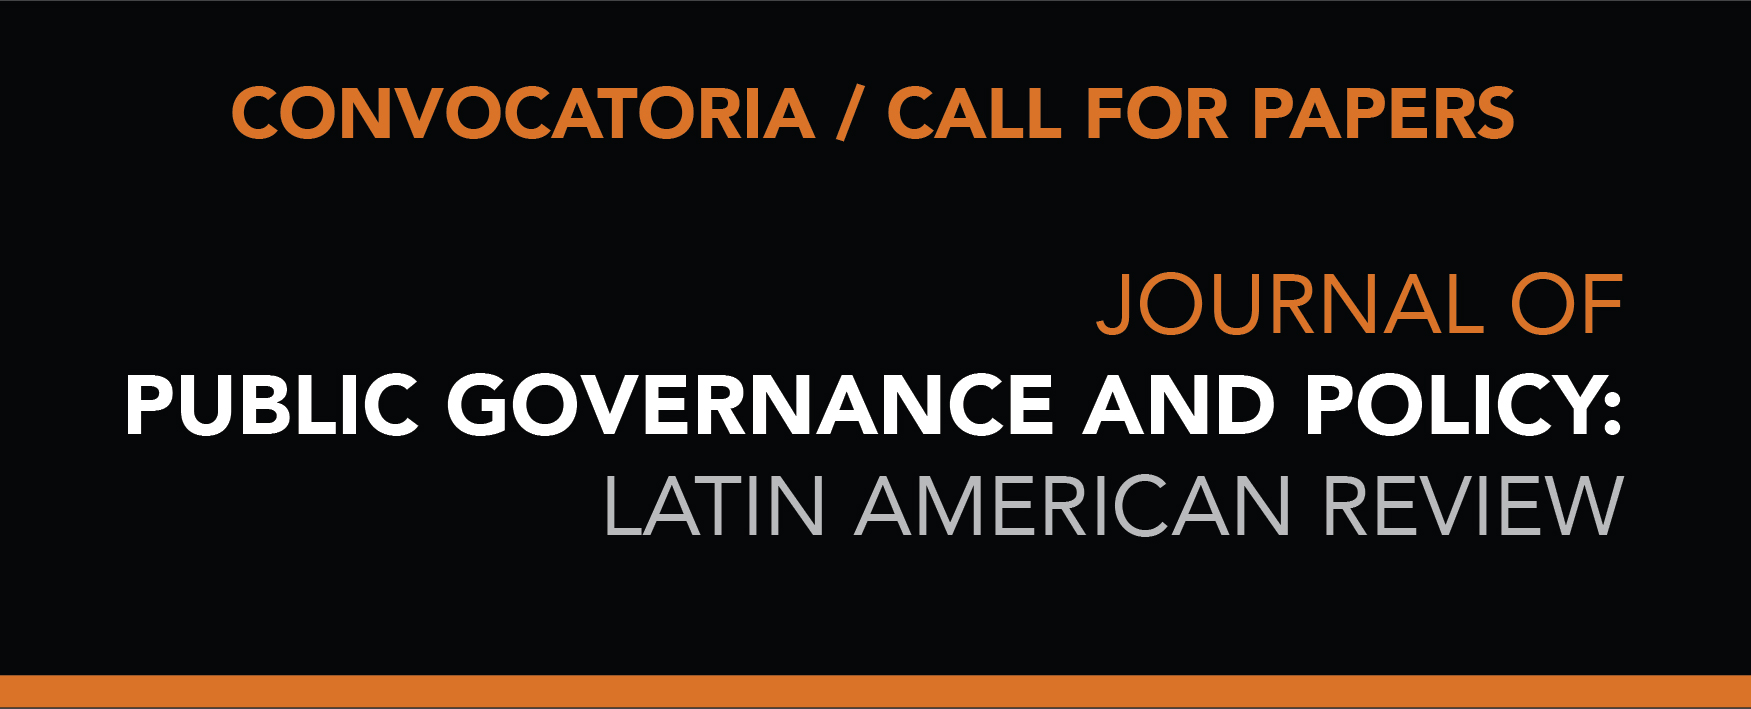 Convocatoria: Journal of Public Governance and Policy: Latin American Review